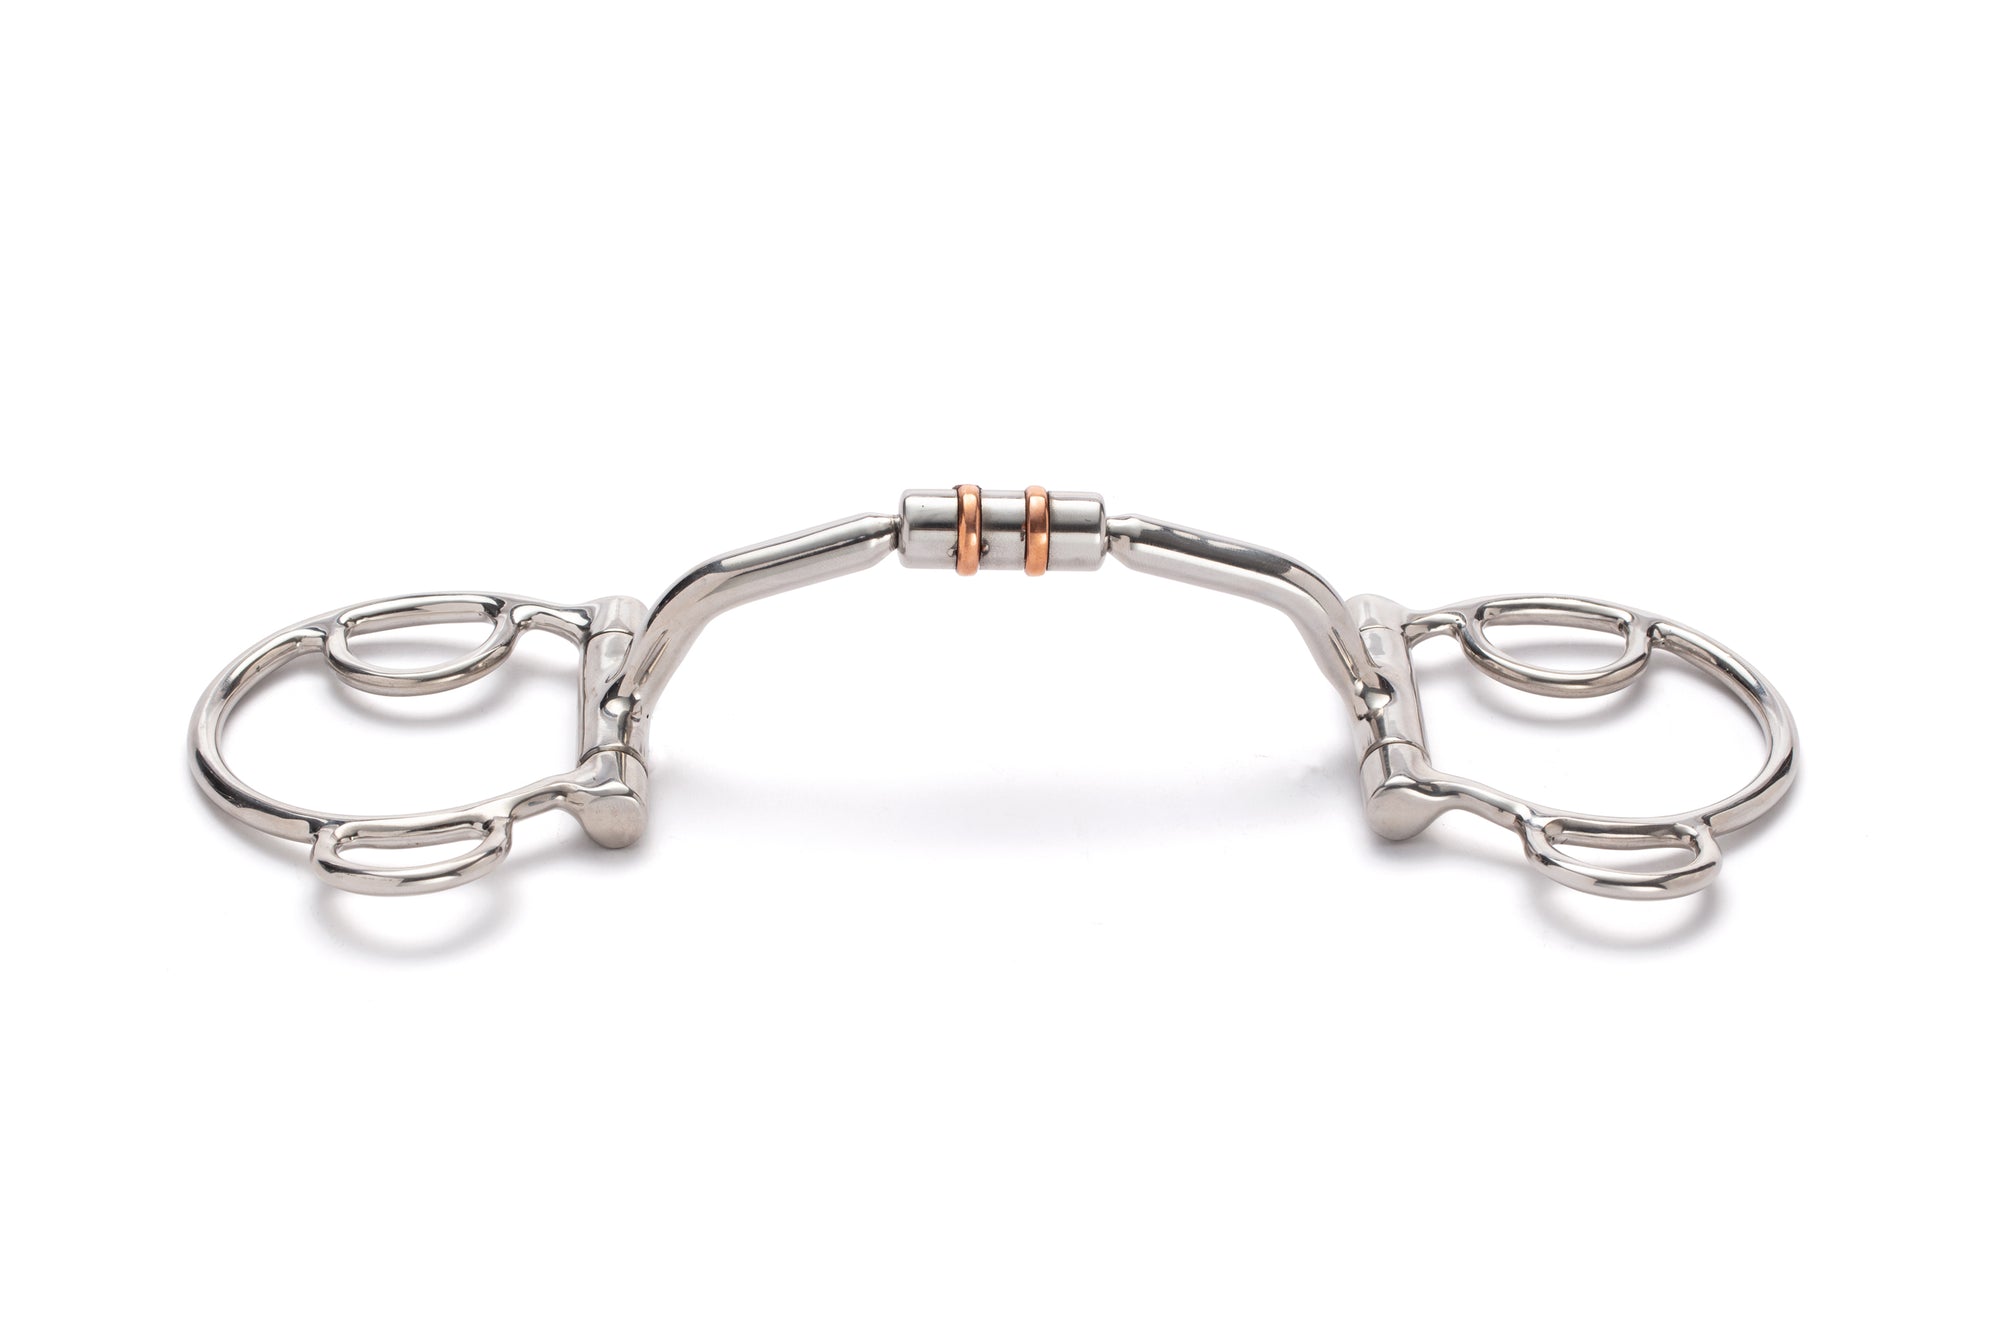 Western D Snaffle Bit with Leverage Points | Angus Barrett Saddlery